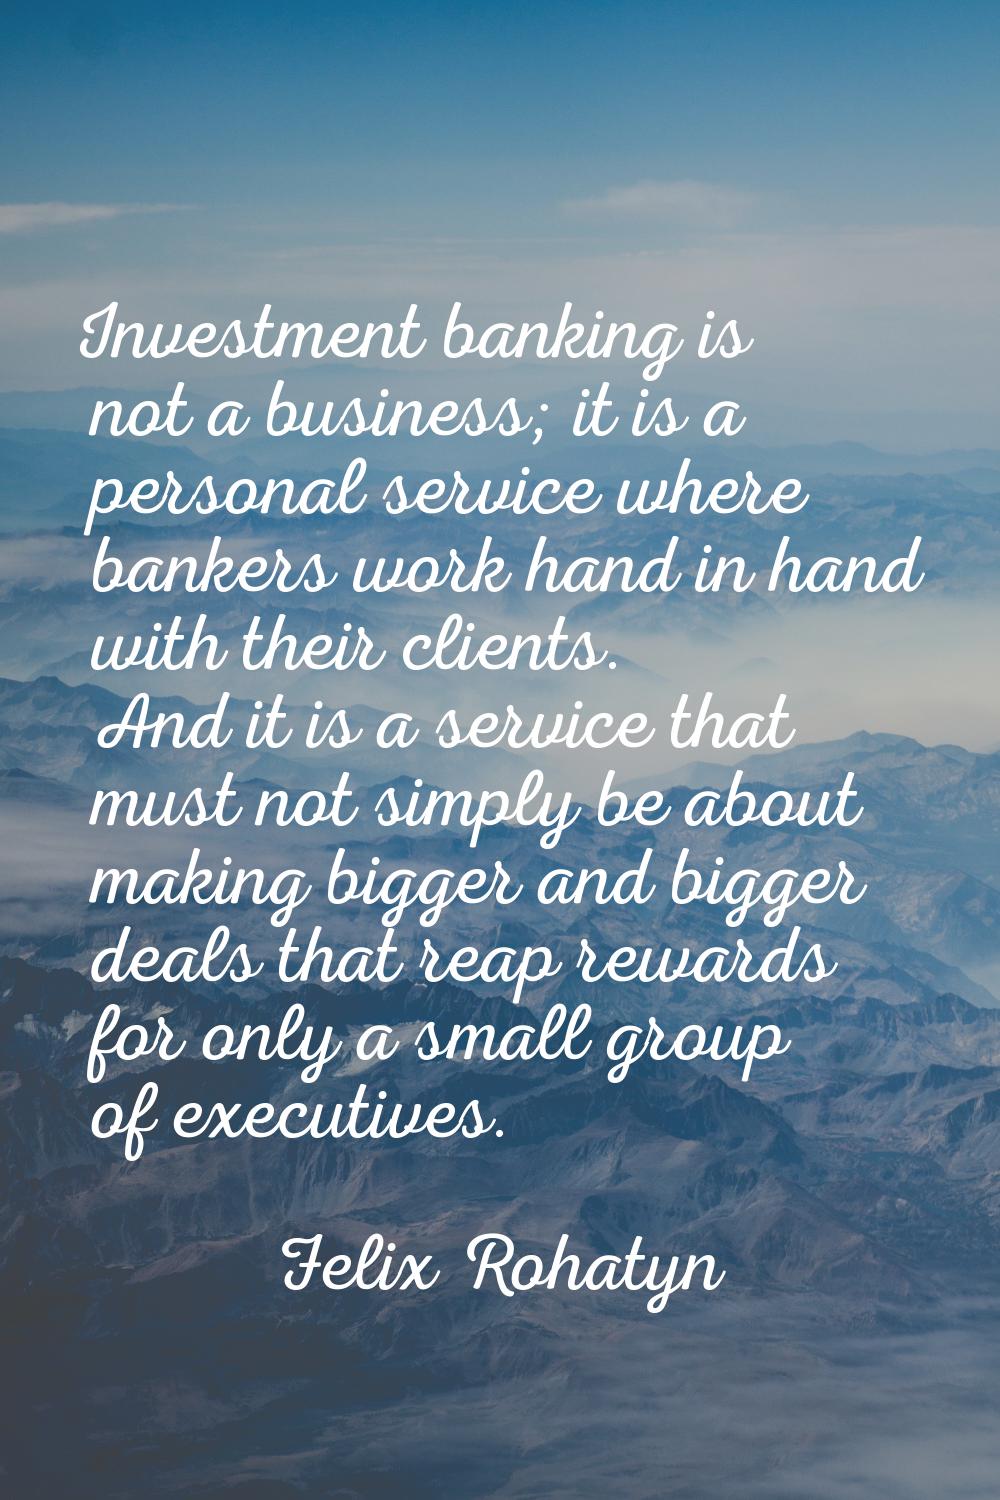 Investment banking is not a business; it is a personal service where bankers work hand in hand with